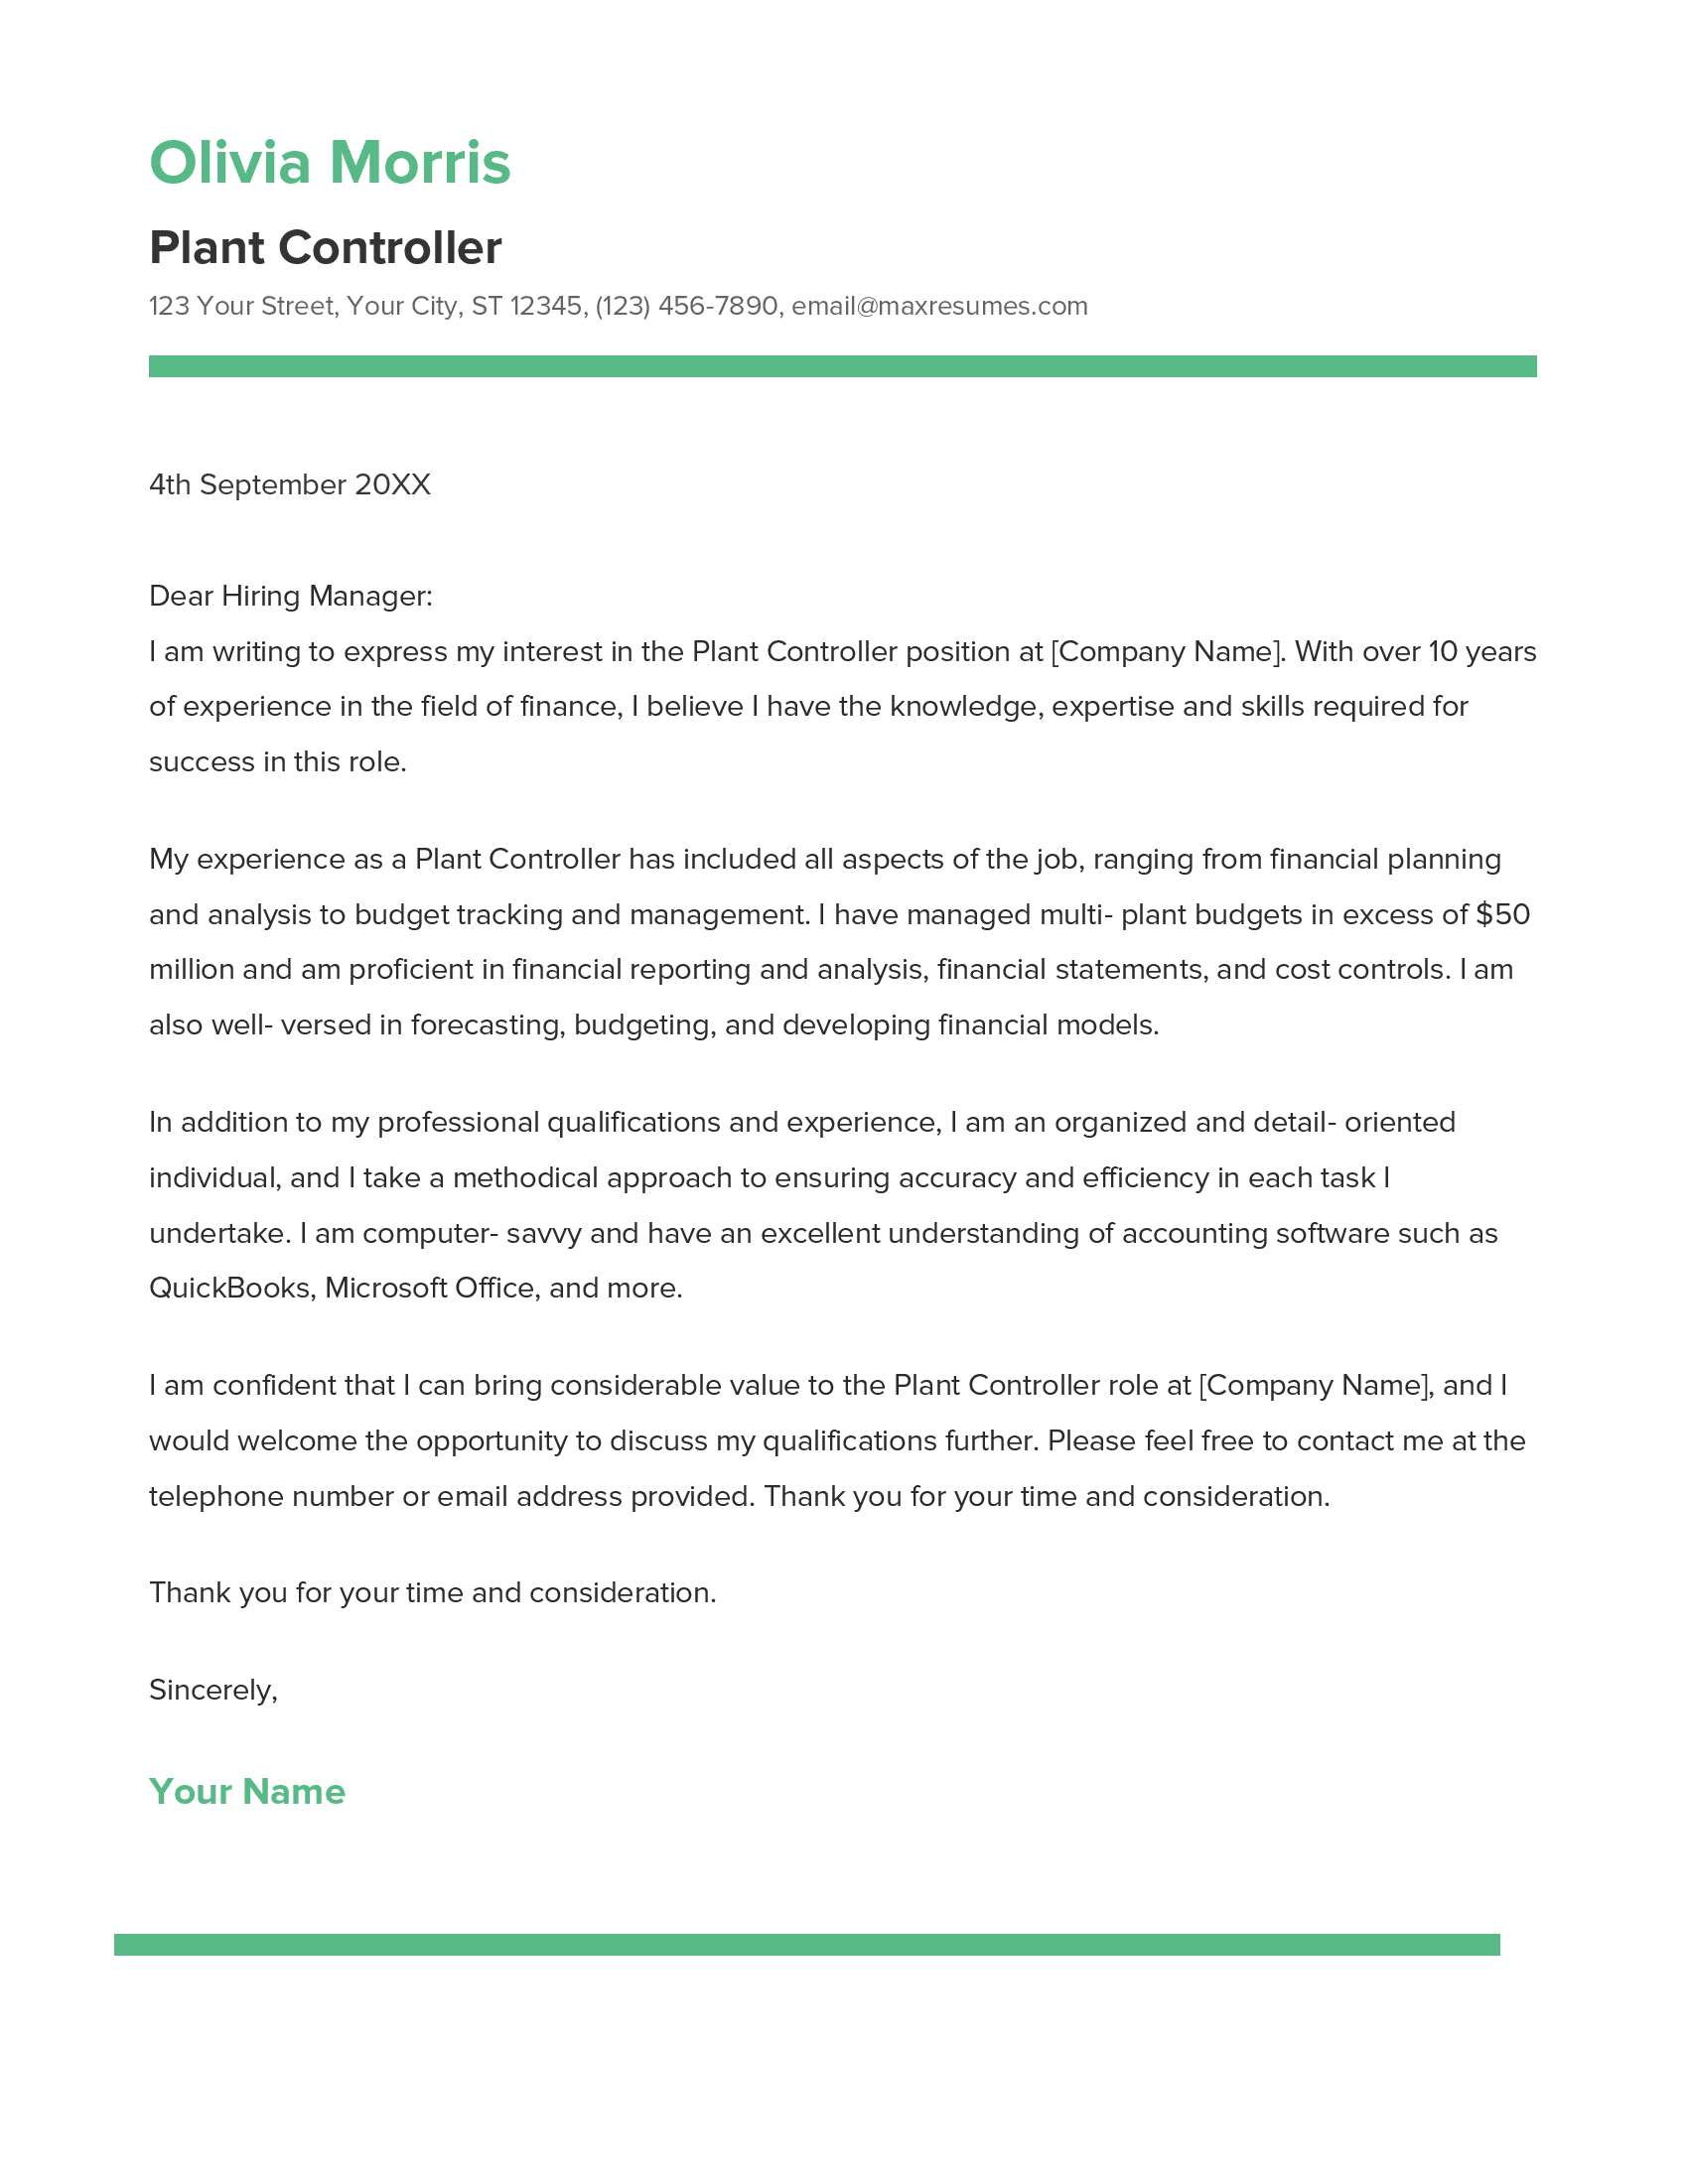 Plant Controller Cover Letter Example